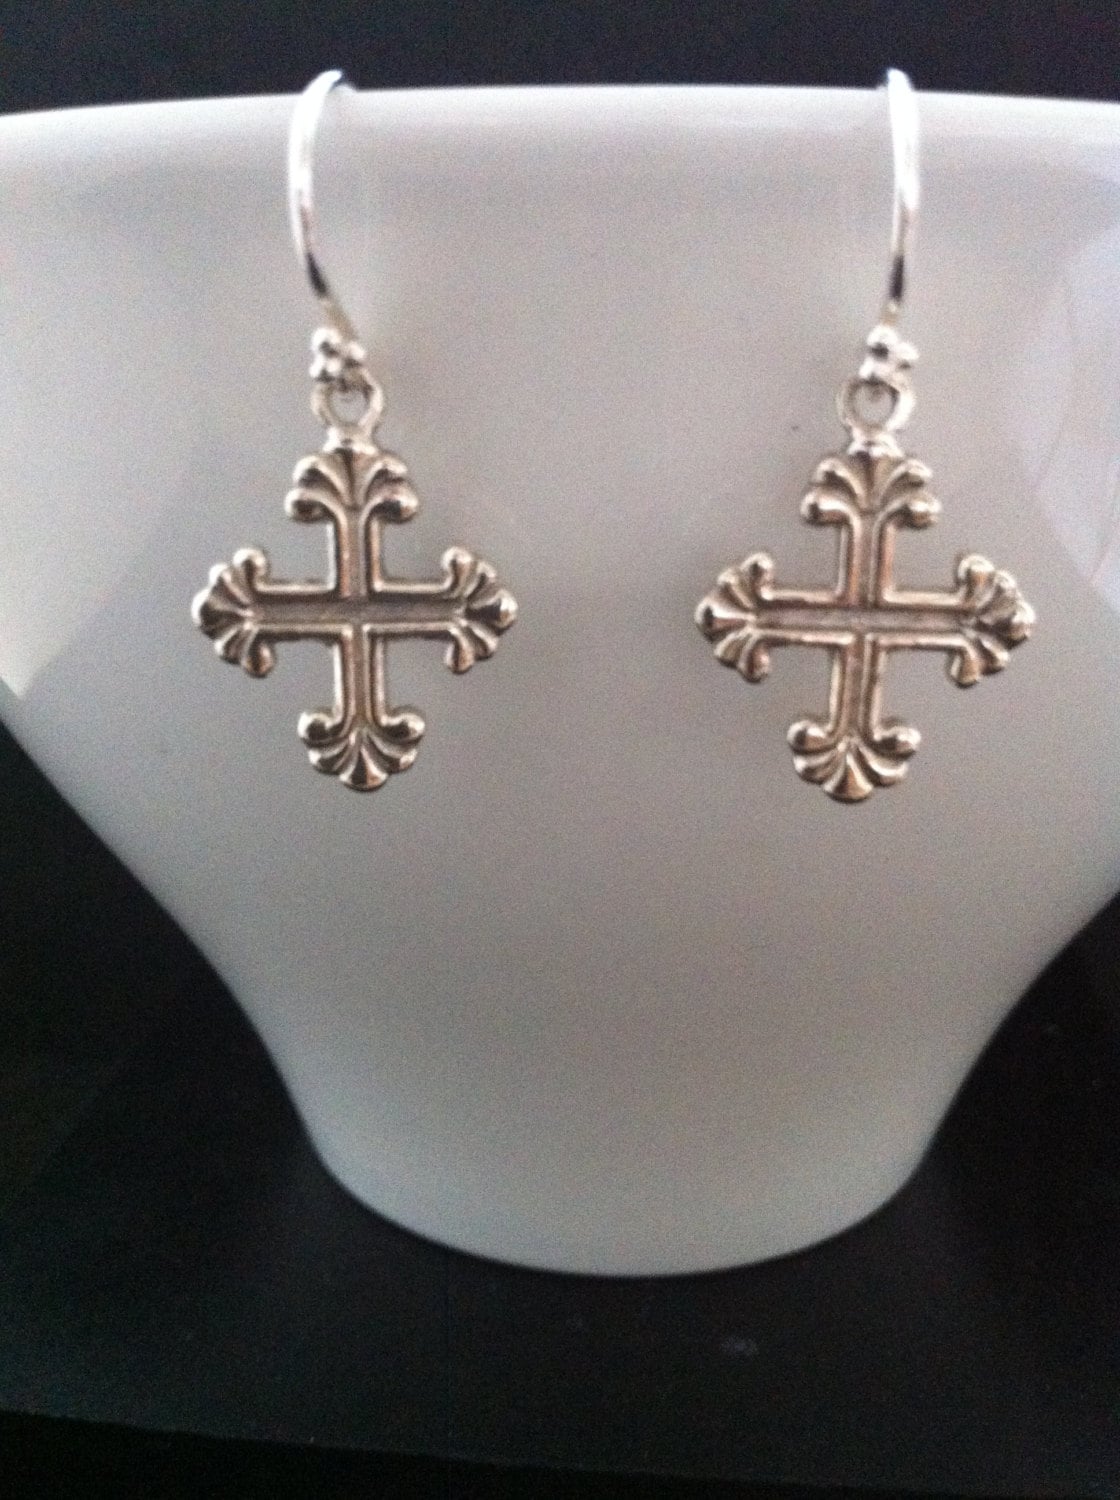 Celtic Cross Drop Earrings, Sterling Silver Earrings, Gift Ideas, For Her.  Christmas Gift, Valentine's Day, Mother's Day.